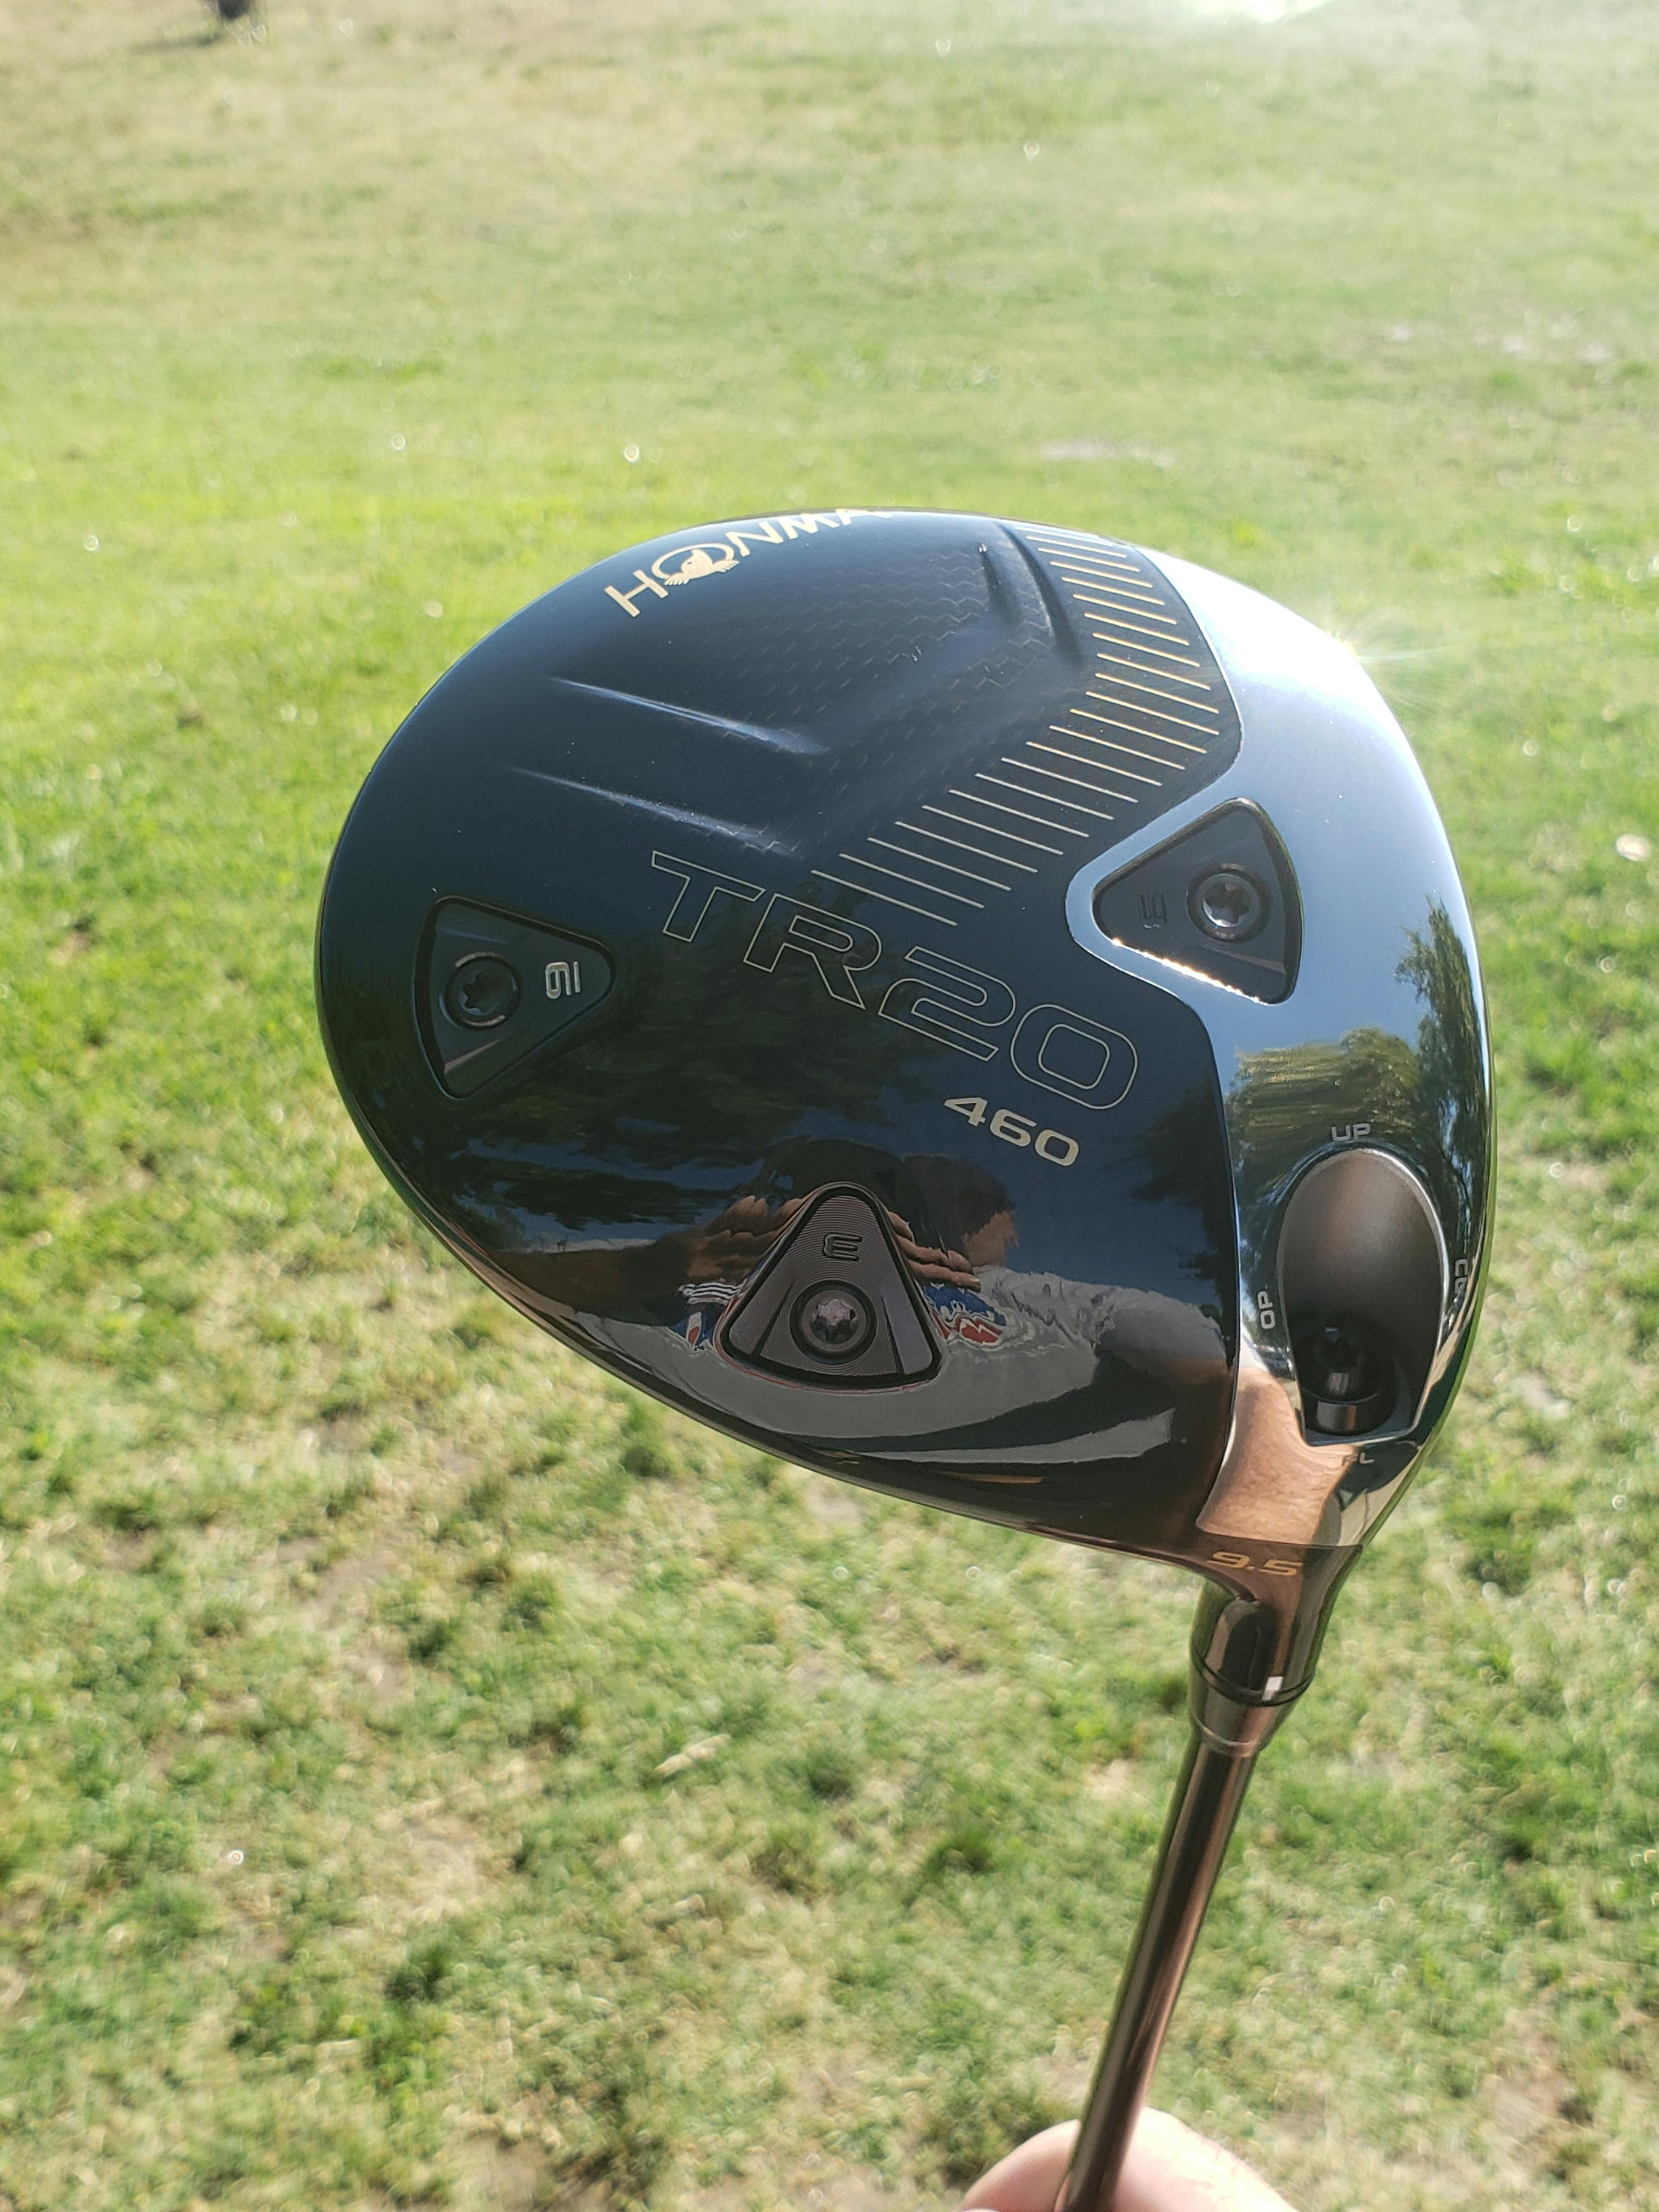 Expert Review Honma Golf Clubs Curated